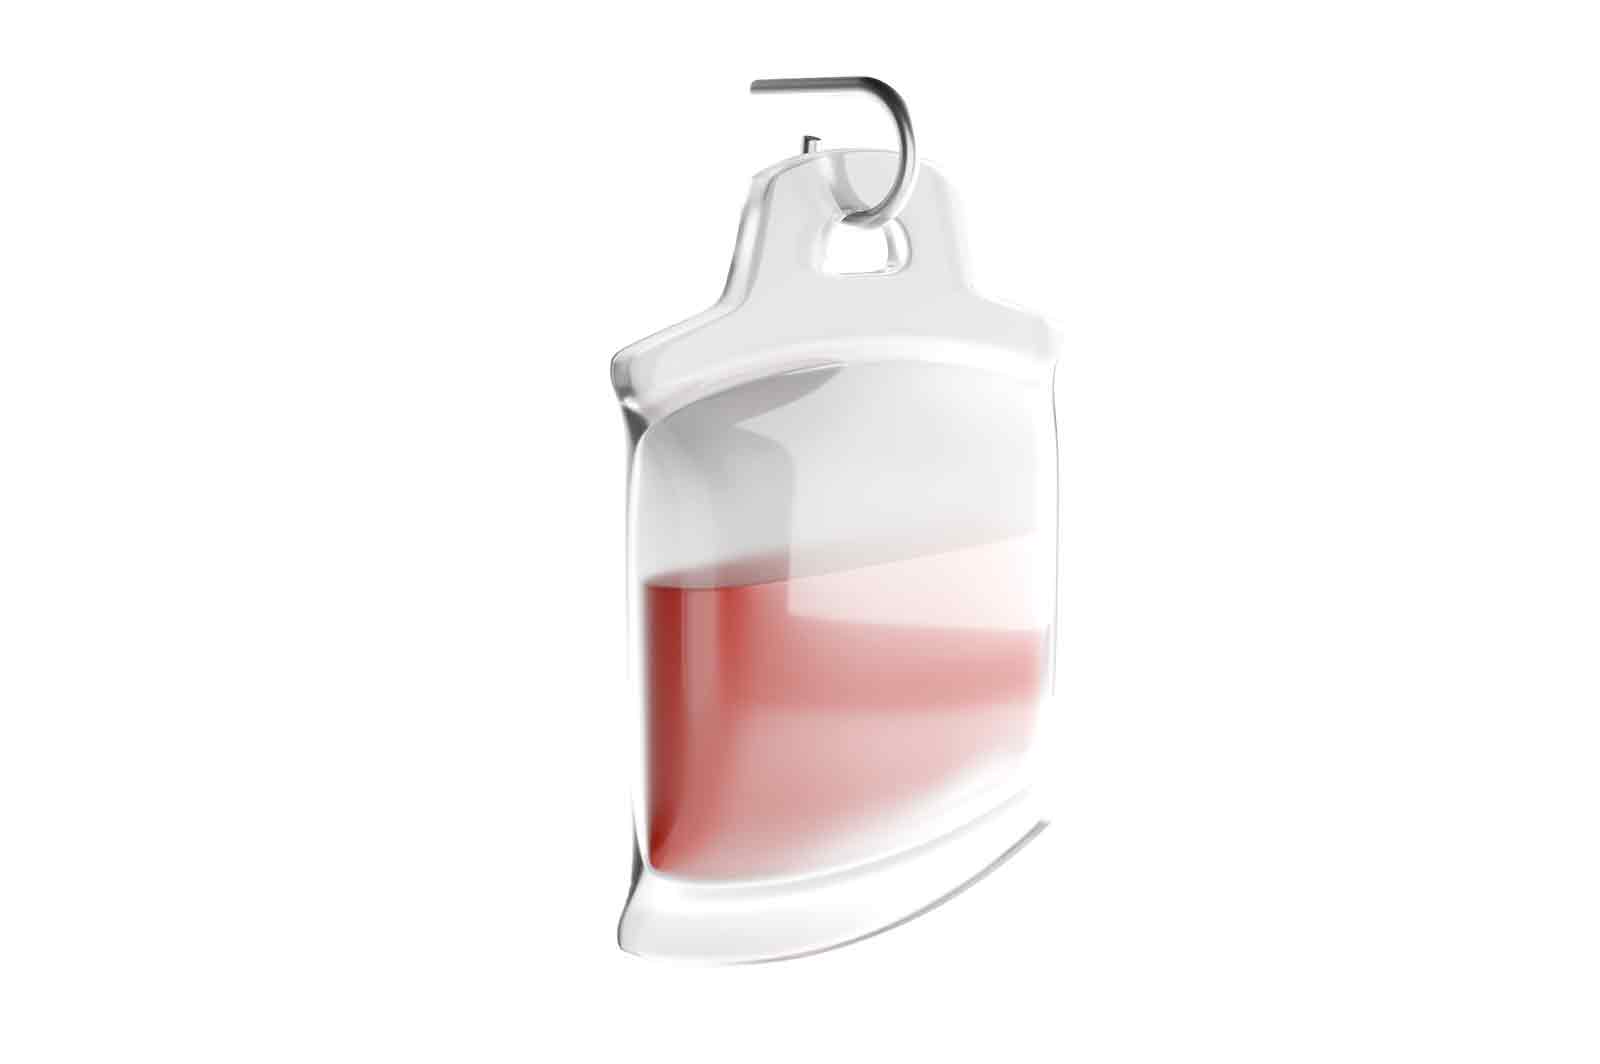 Medical plastic dropper with blood, 3d rendered illustration. Device for collecting or transferring blood samples